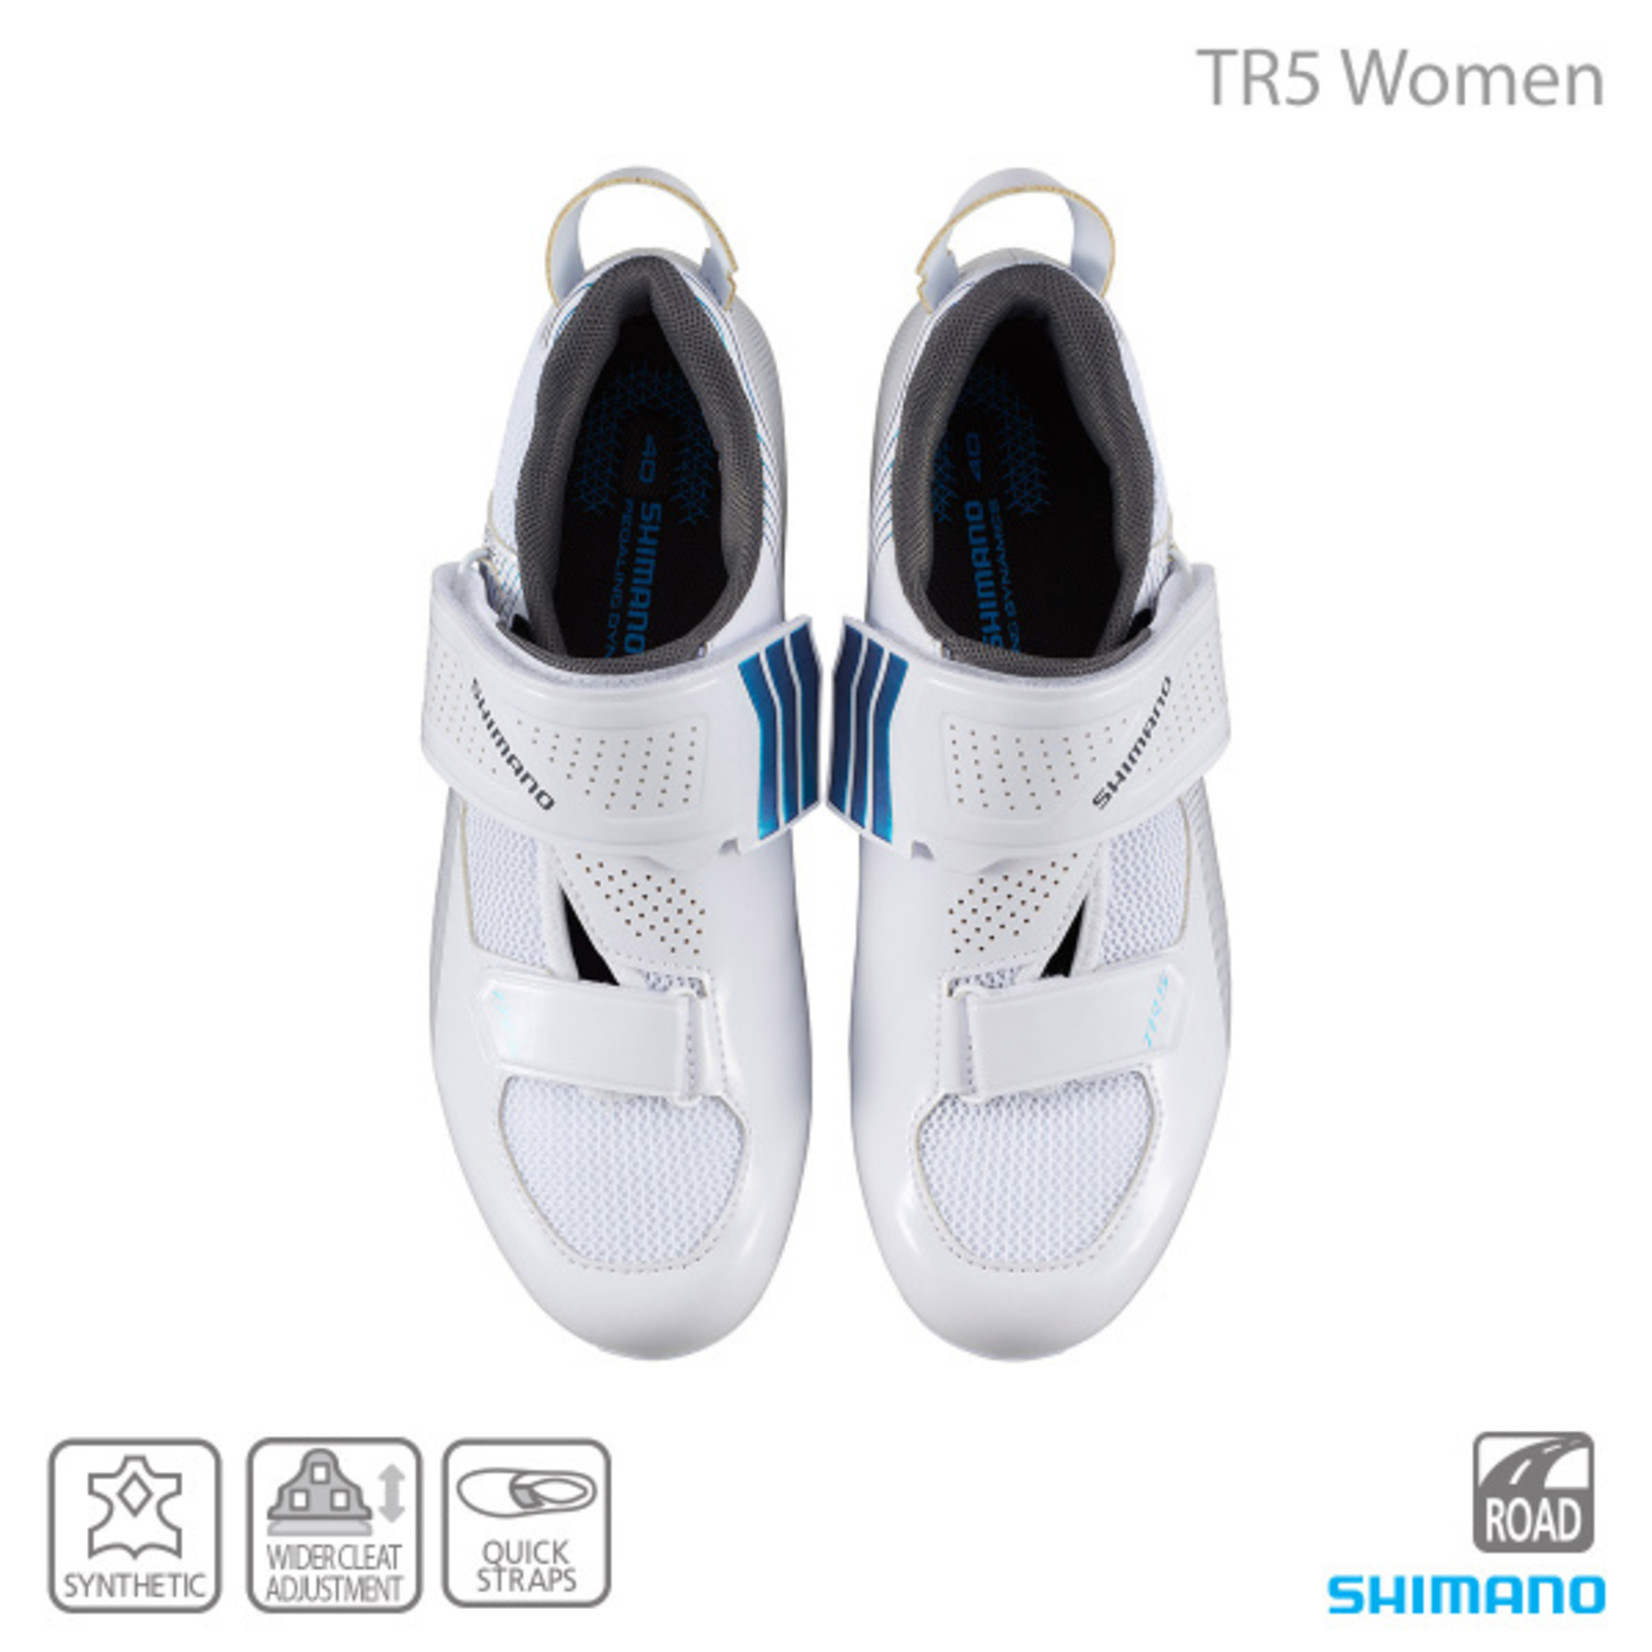 Shimano Shimano SH-TR501 Women's  - White Advanced Fit And Performance Technology